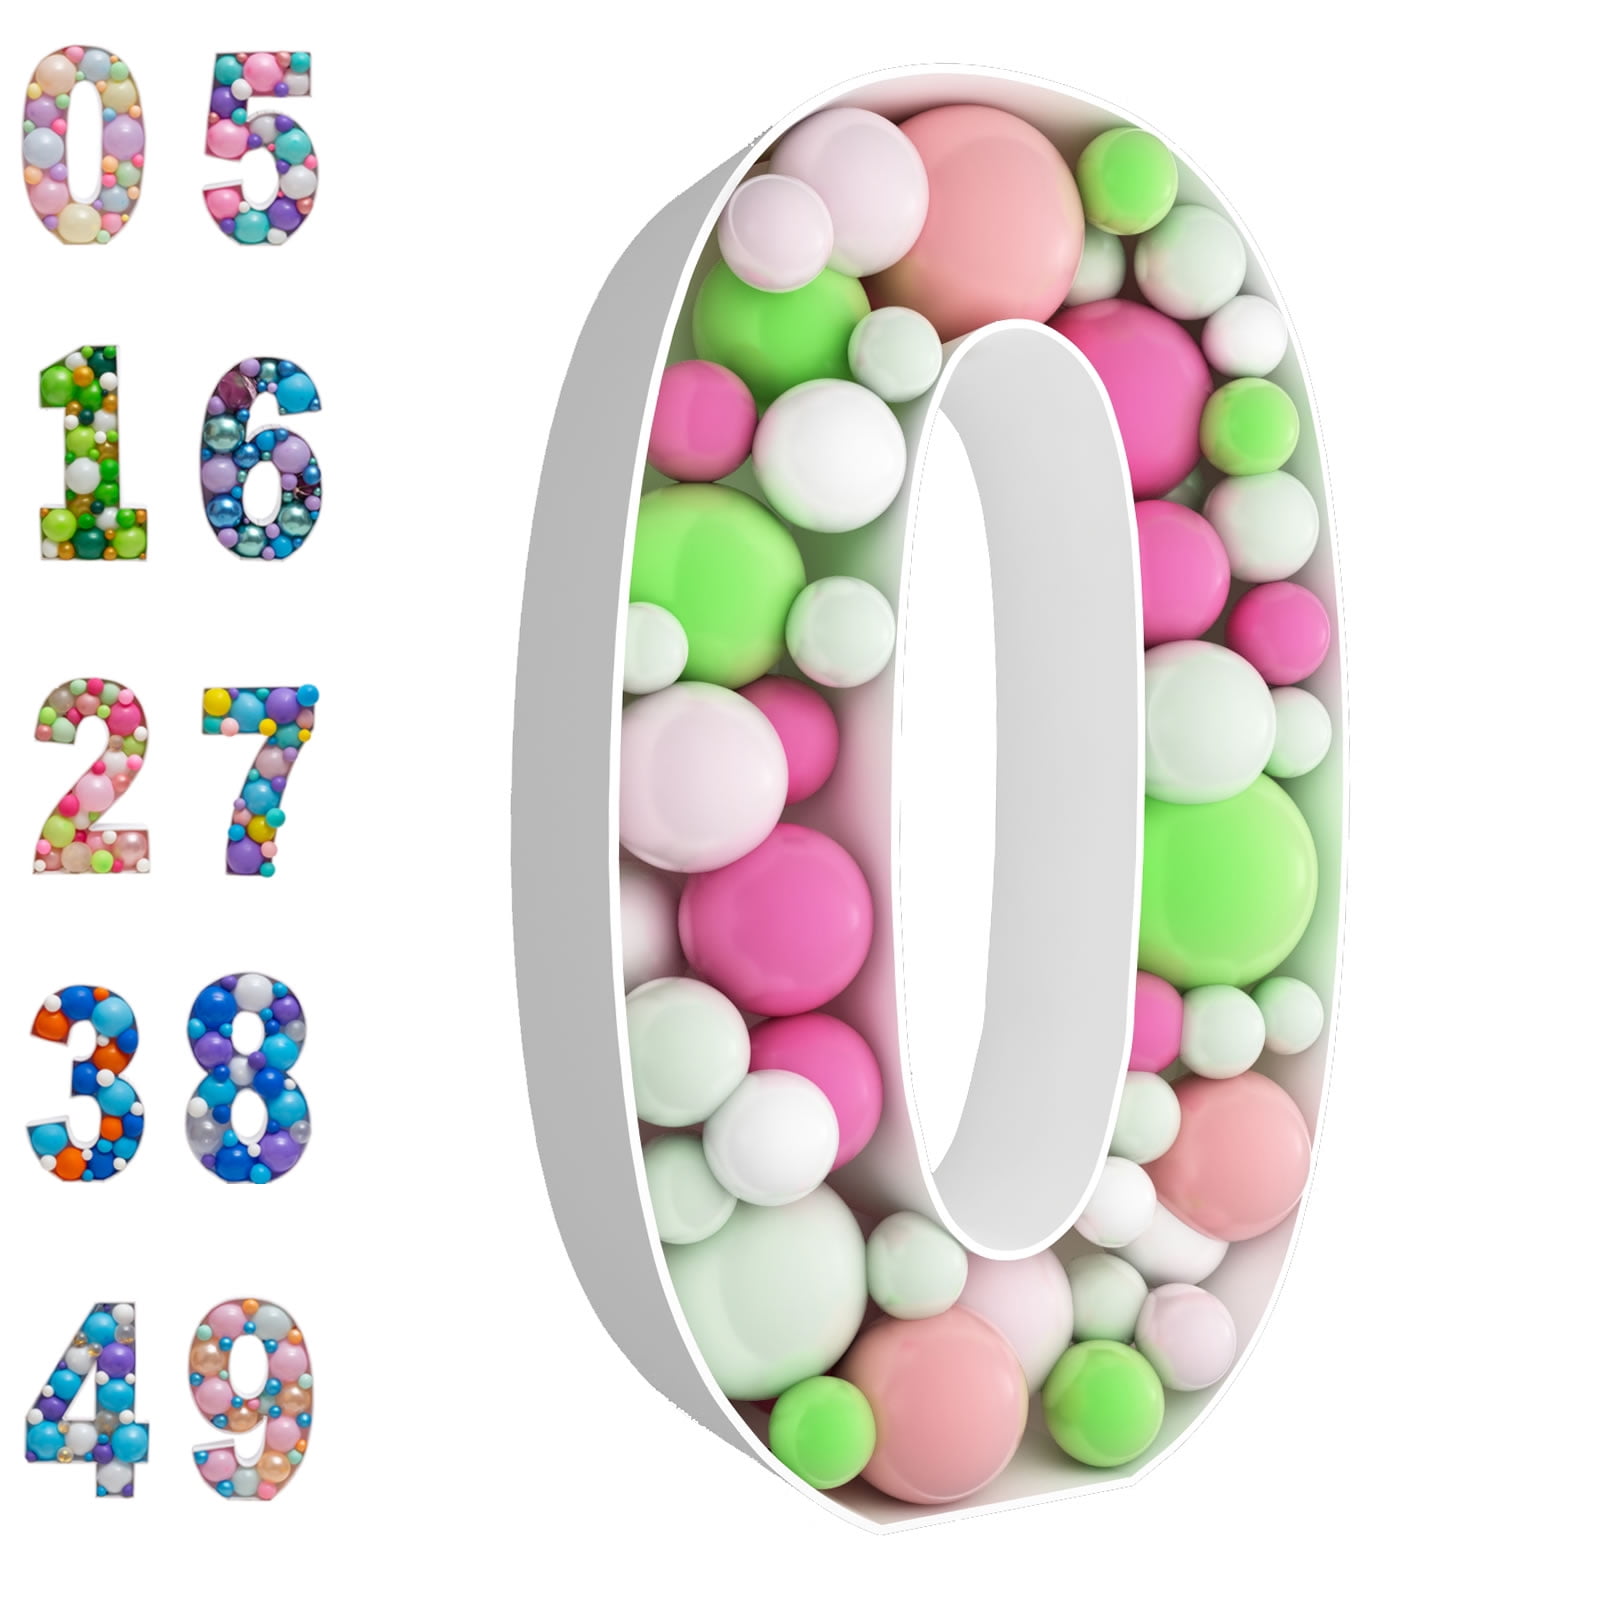  HOUSE OF PARTY 3FT Mosaic Balloon Frame Number 8, Marquee Light  Up Numbers Pre-Cut Kit Thick Foam Board for 8th 18th 80th Birthday  Decorations for Women Men, Wedding Anniversary Backdrop Decorations 